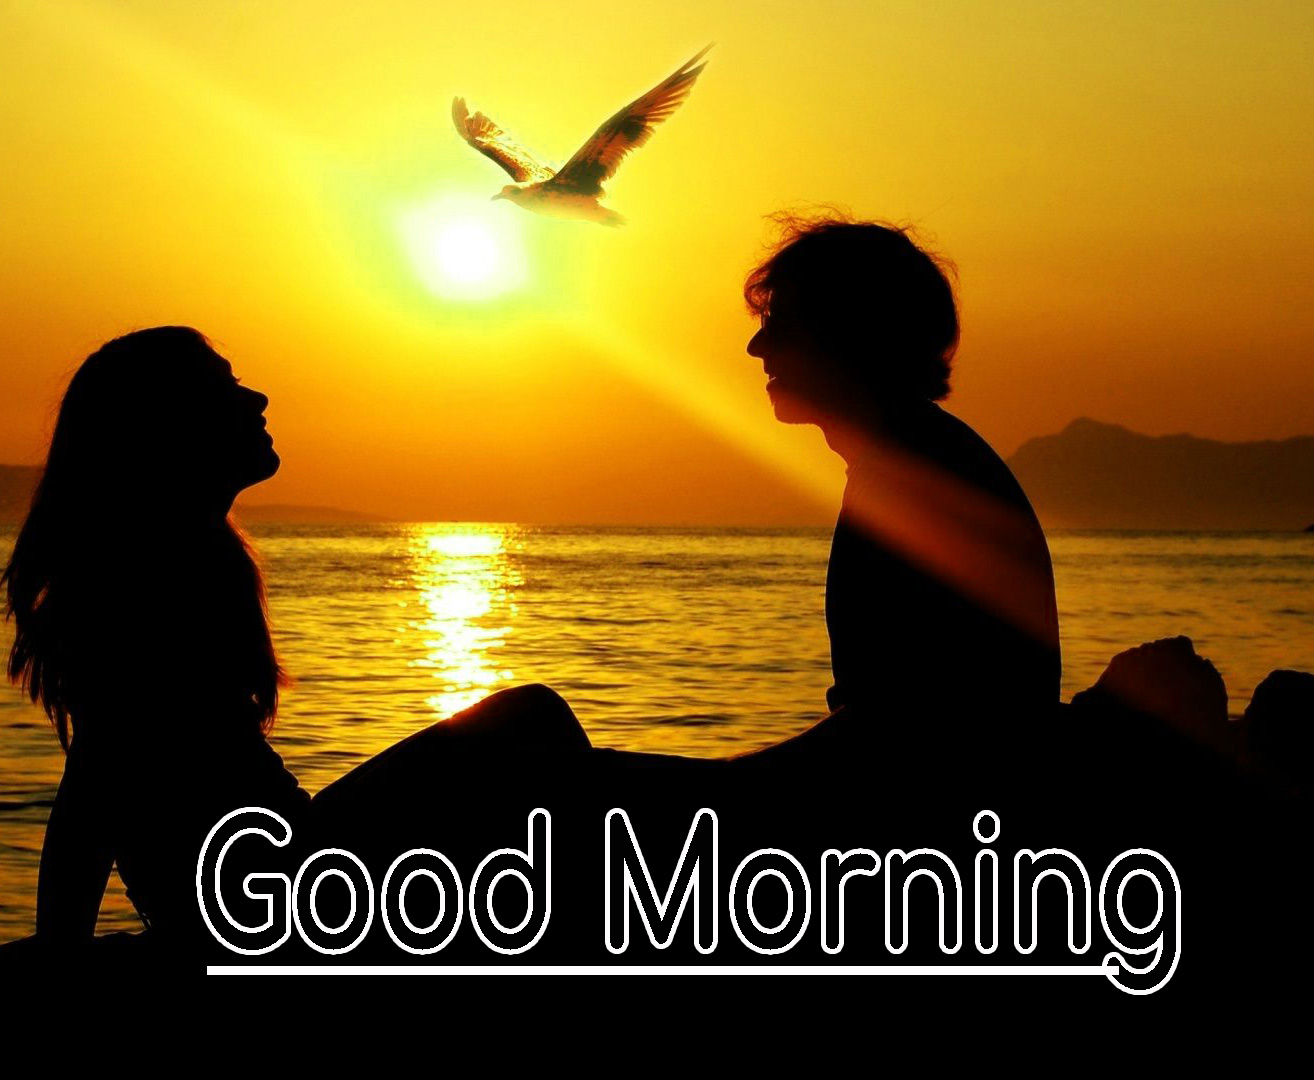 Free Lover Good Morning Images Wallpaper Download 